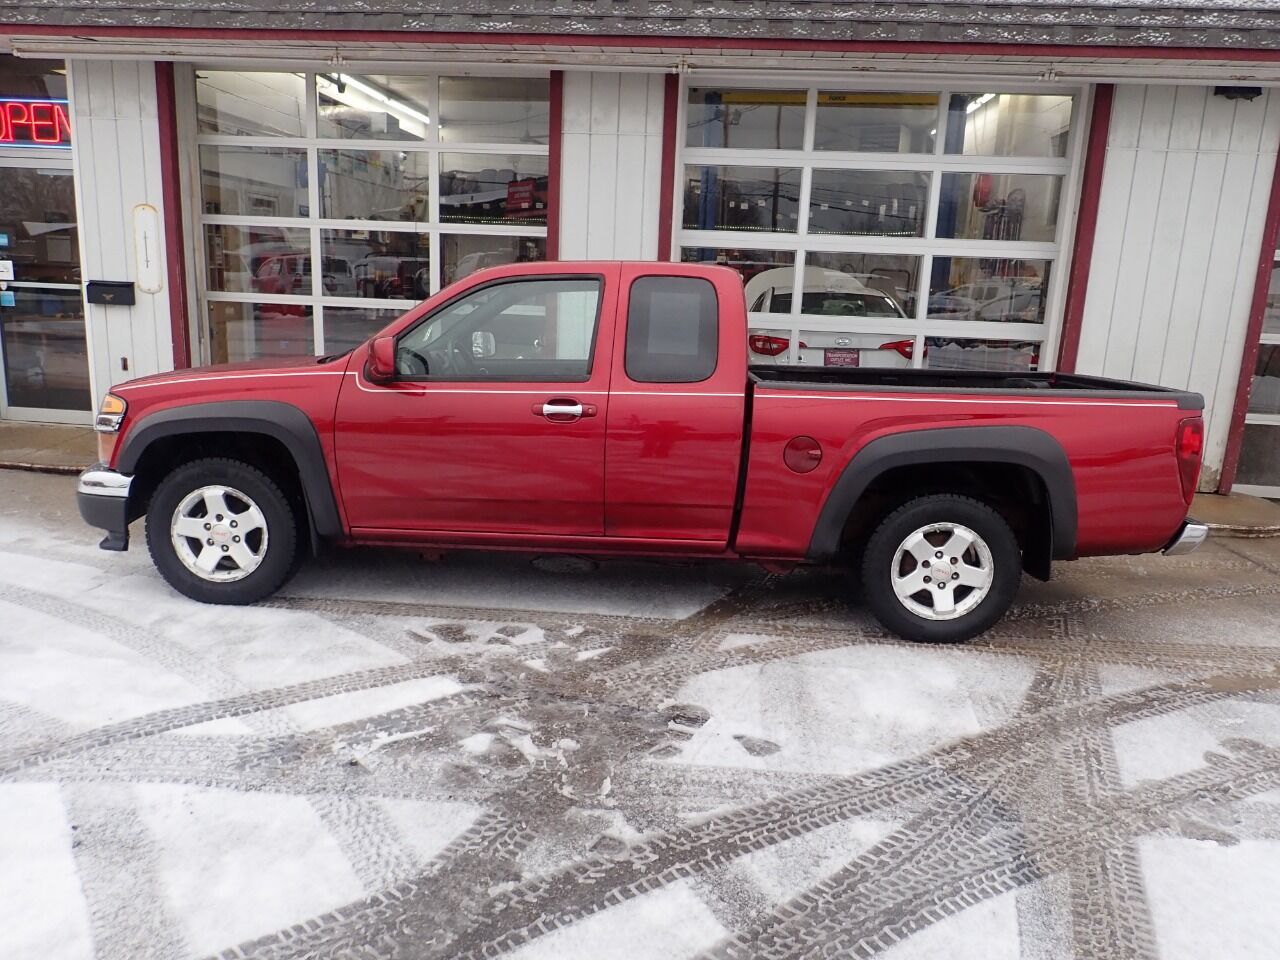 Preowned 2011 GMC Canyon SLT 4x2 4dr Extended Cab for sale by Transportation Outlet Inc in Eastlake, OH